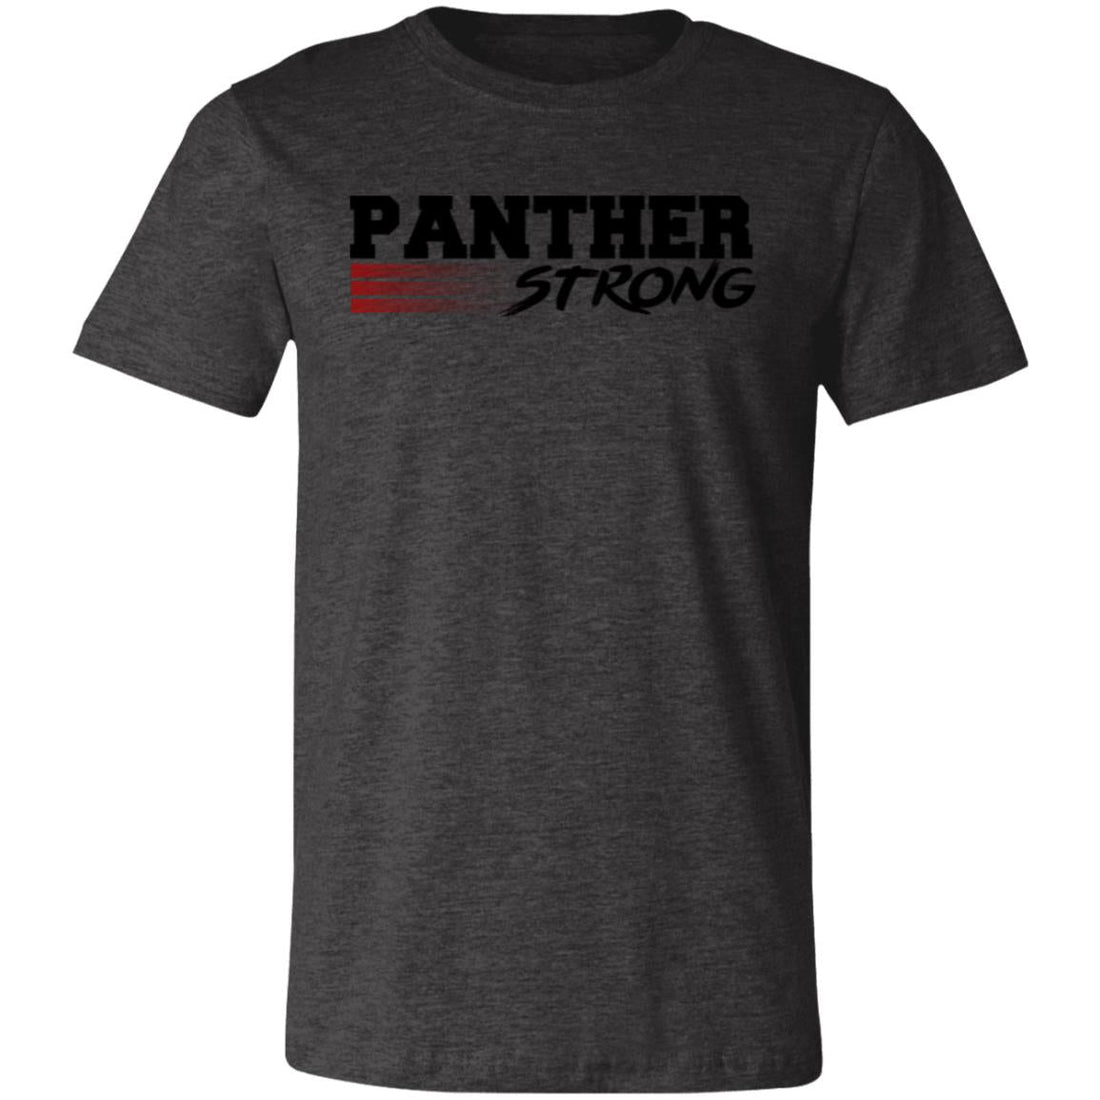 Panther Strong T-Shirt - T-Shirts - Positively Sassy - Panther Strong T-Shirt